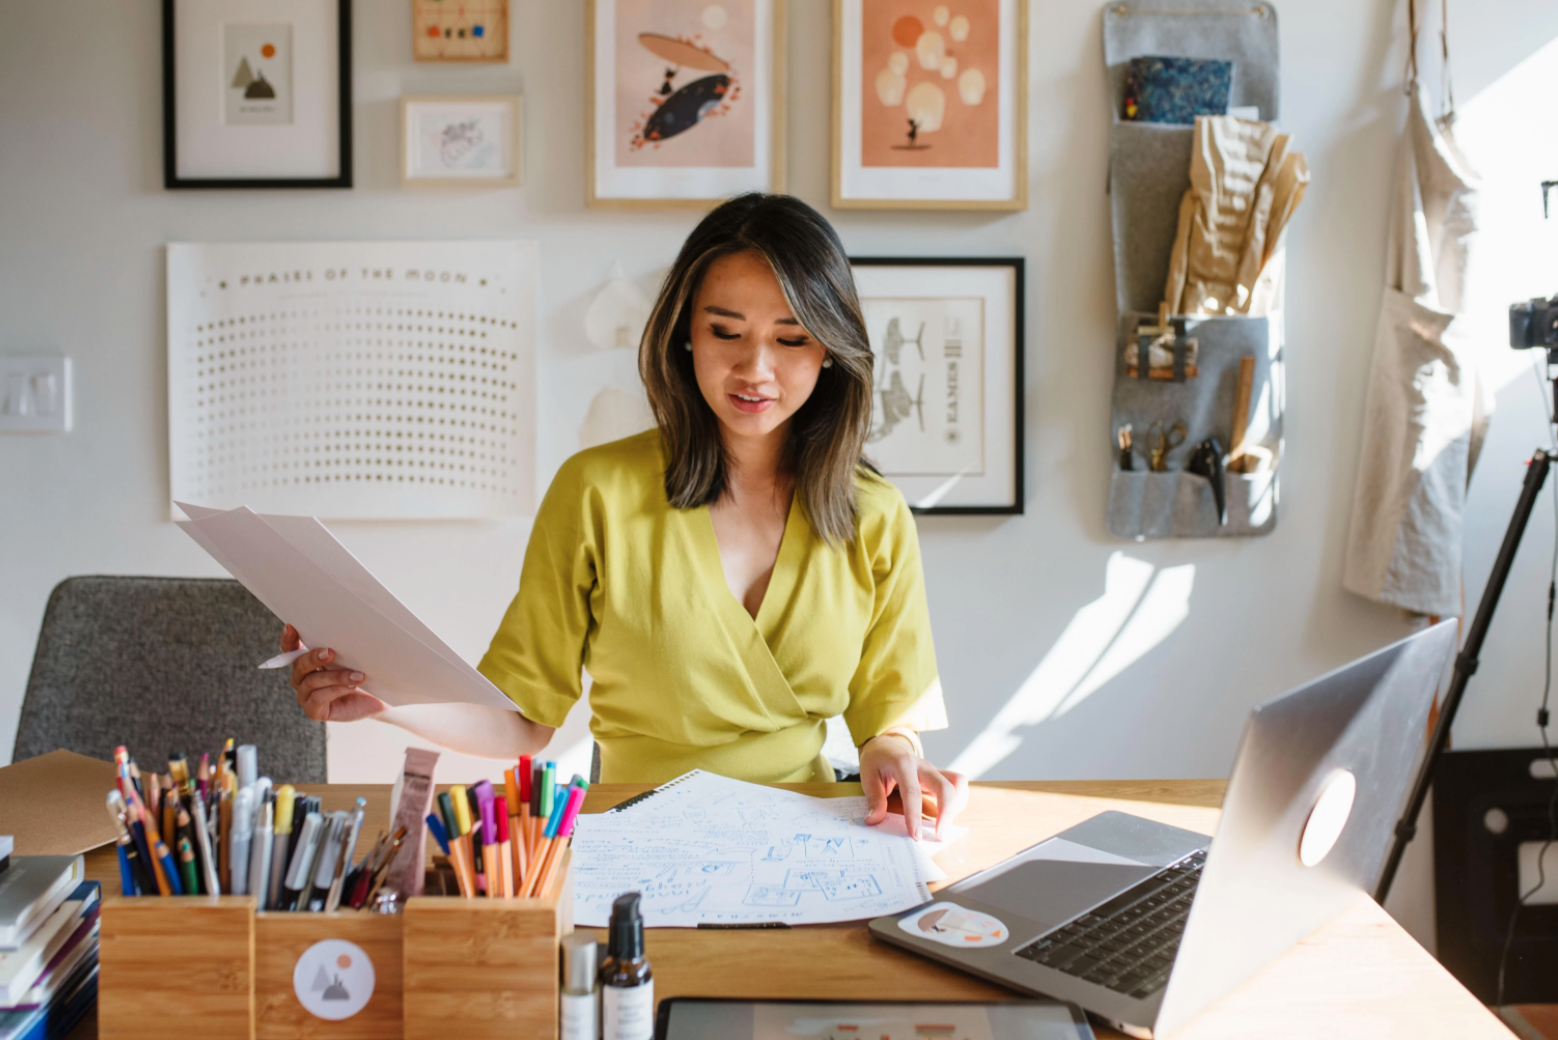 Skillshare Top Teacher Mimi Chao in her new Staff Pick class, "Make Your Creative Space: A Simple & Inspiring Guide"